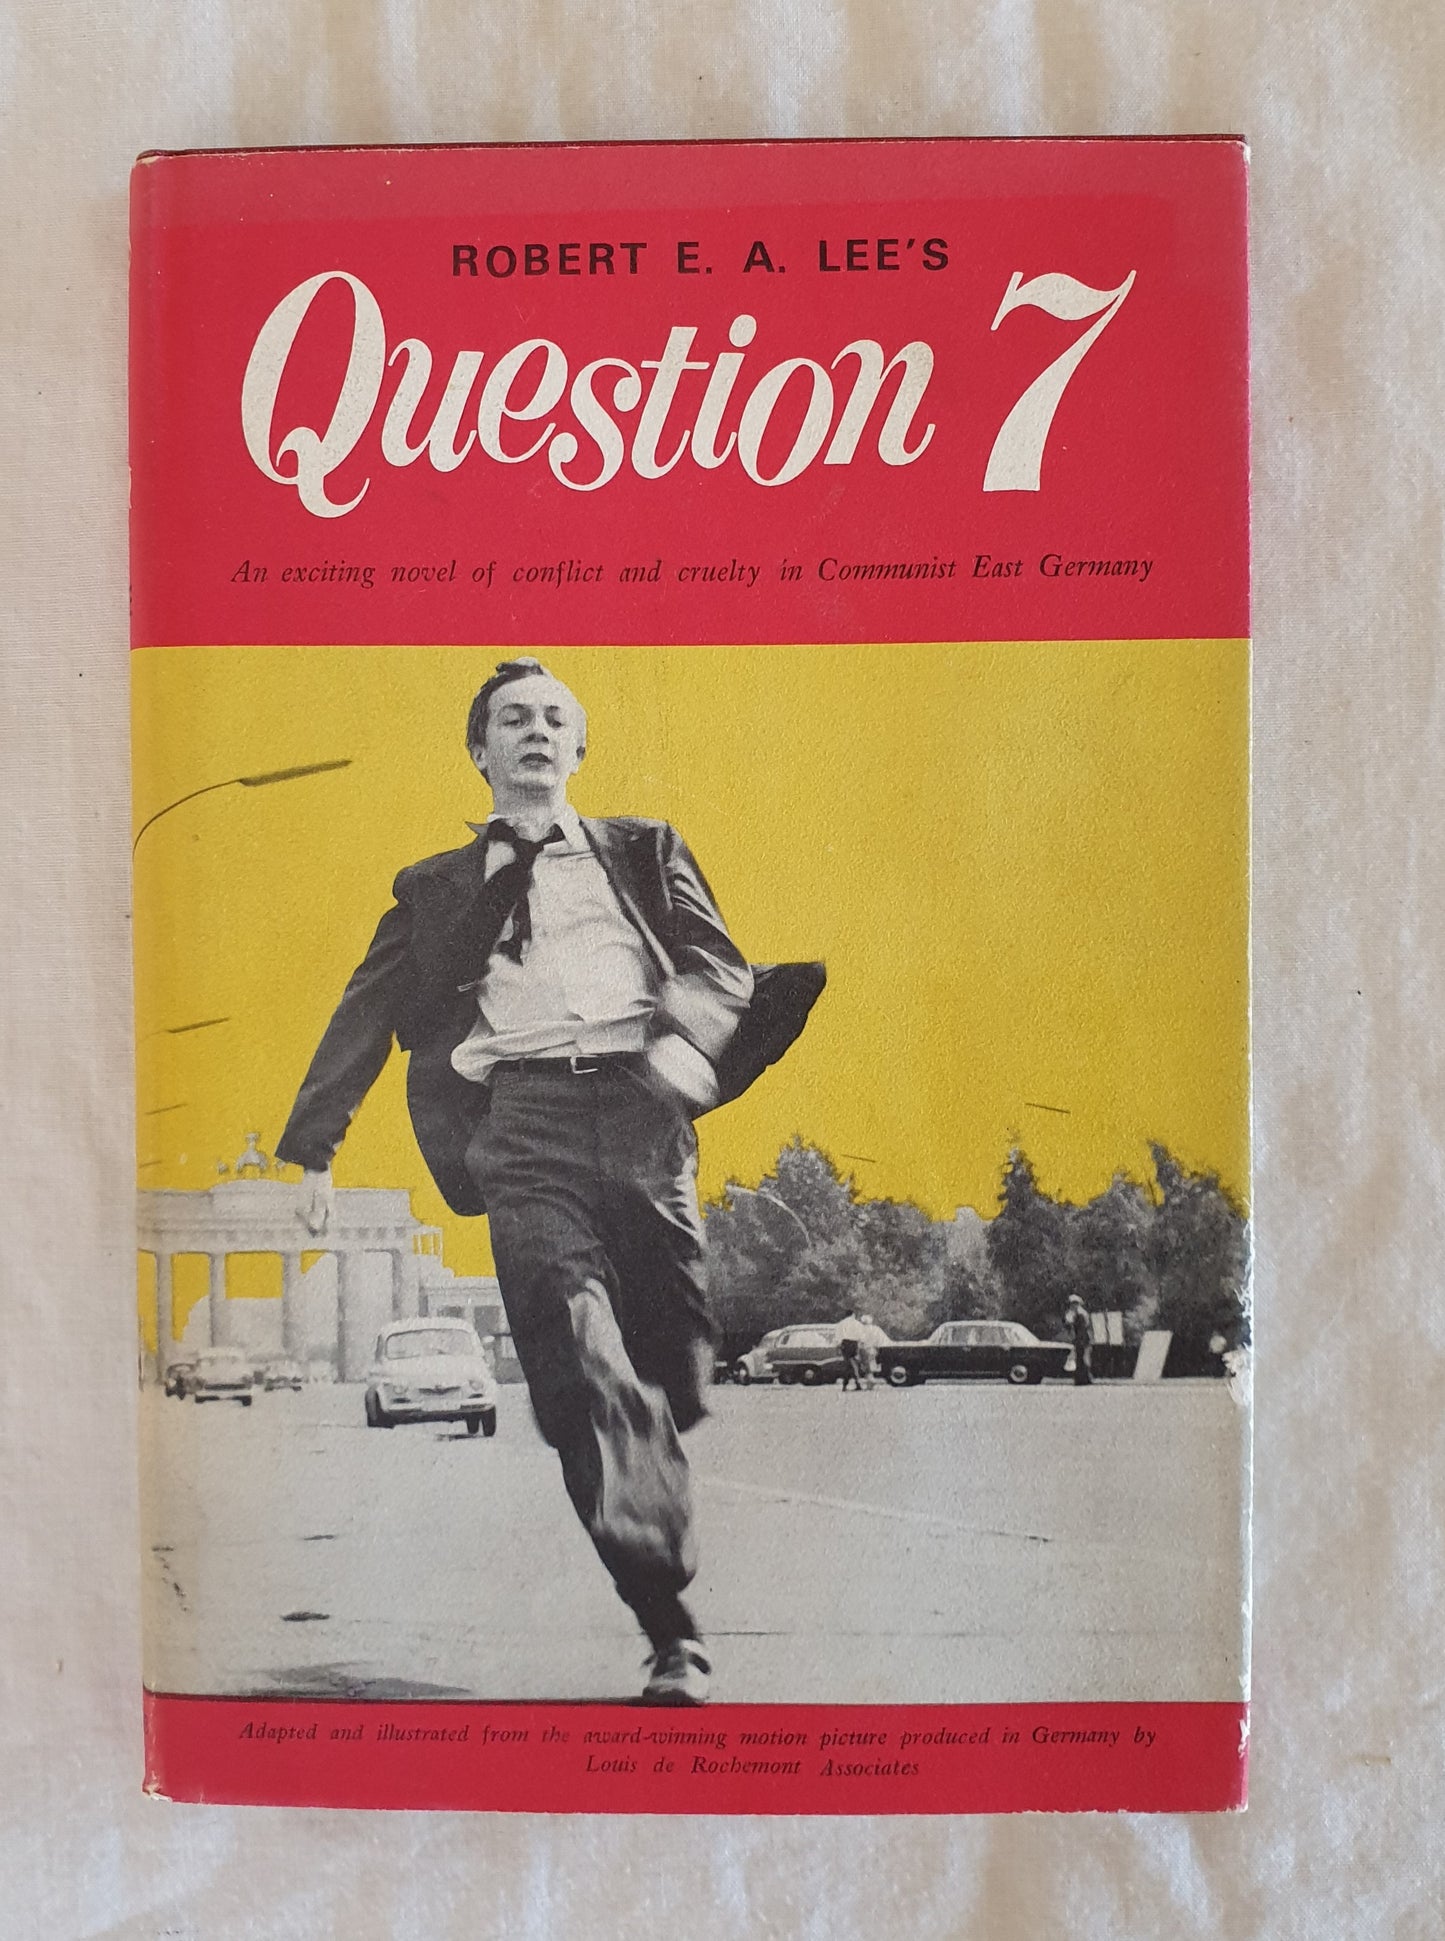 Question 7 by Robert E. A. Lee